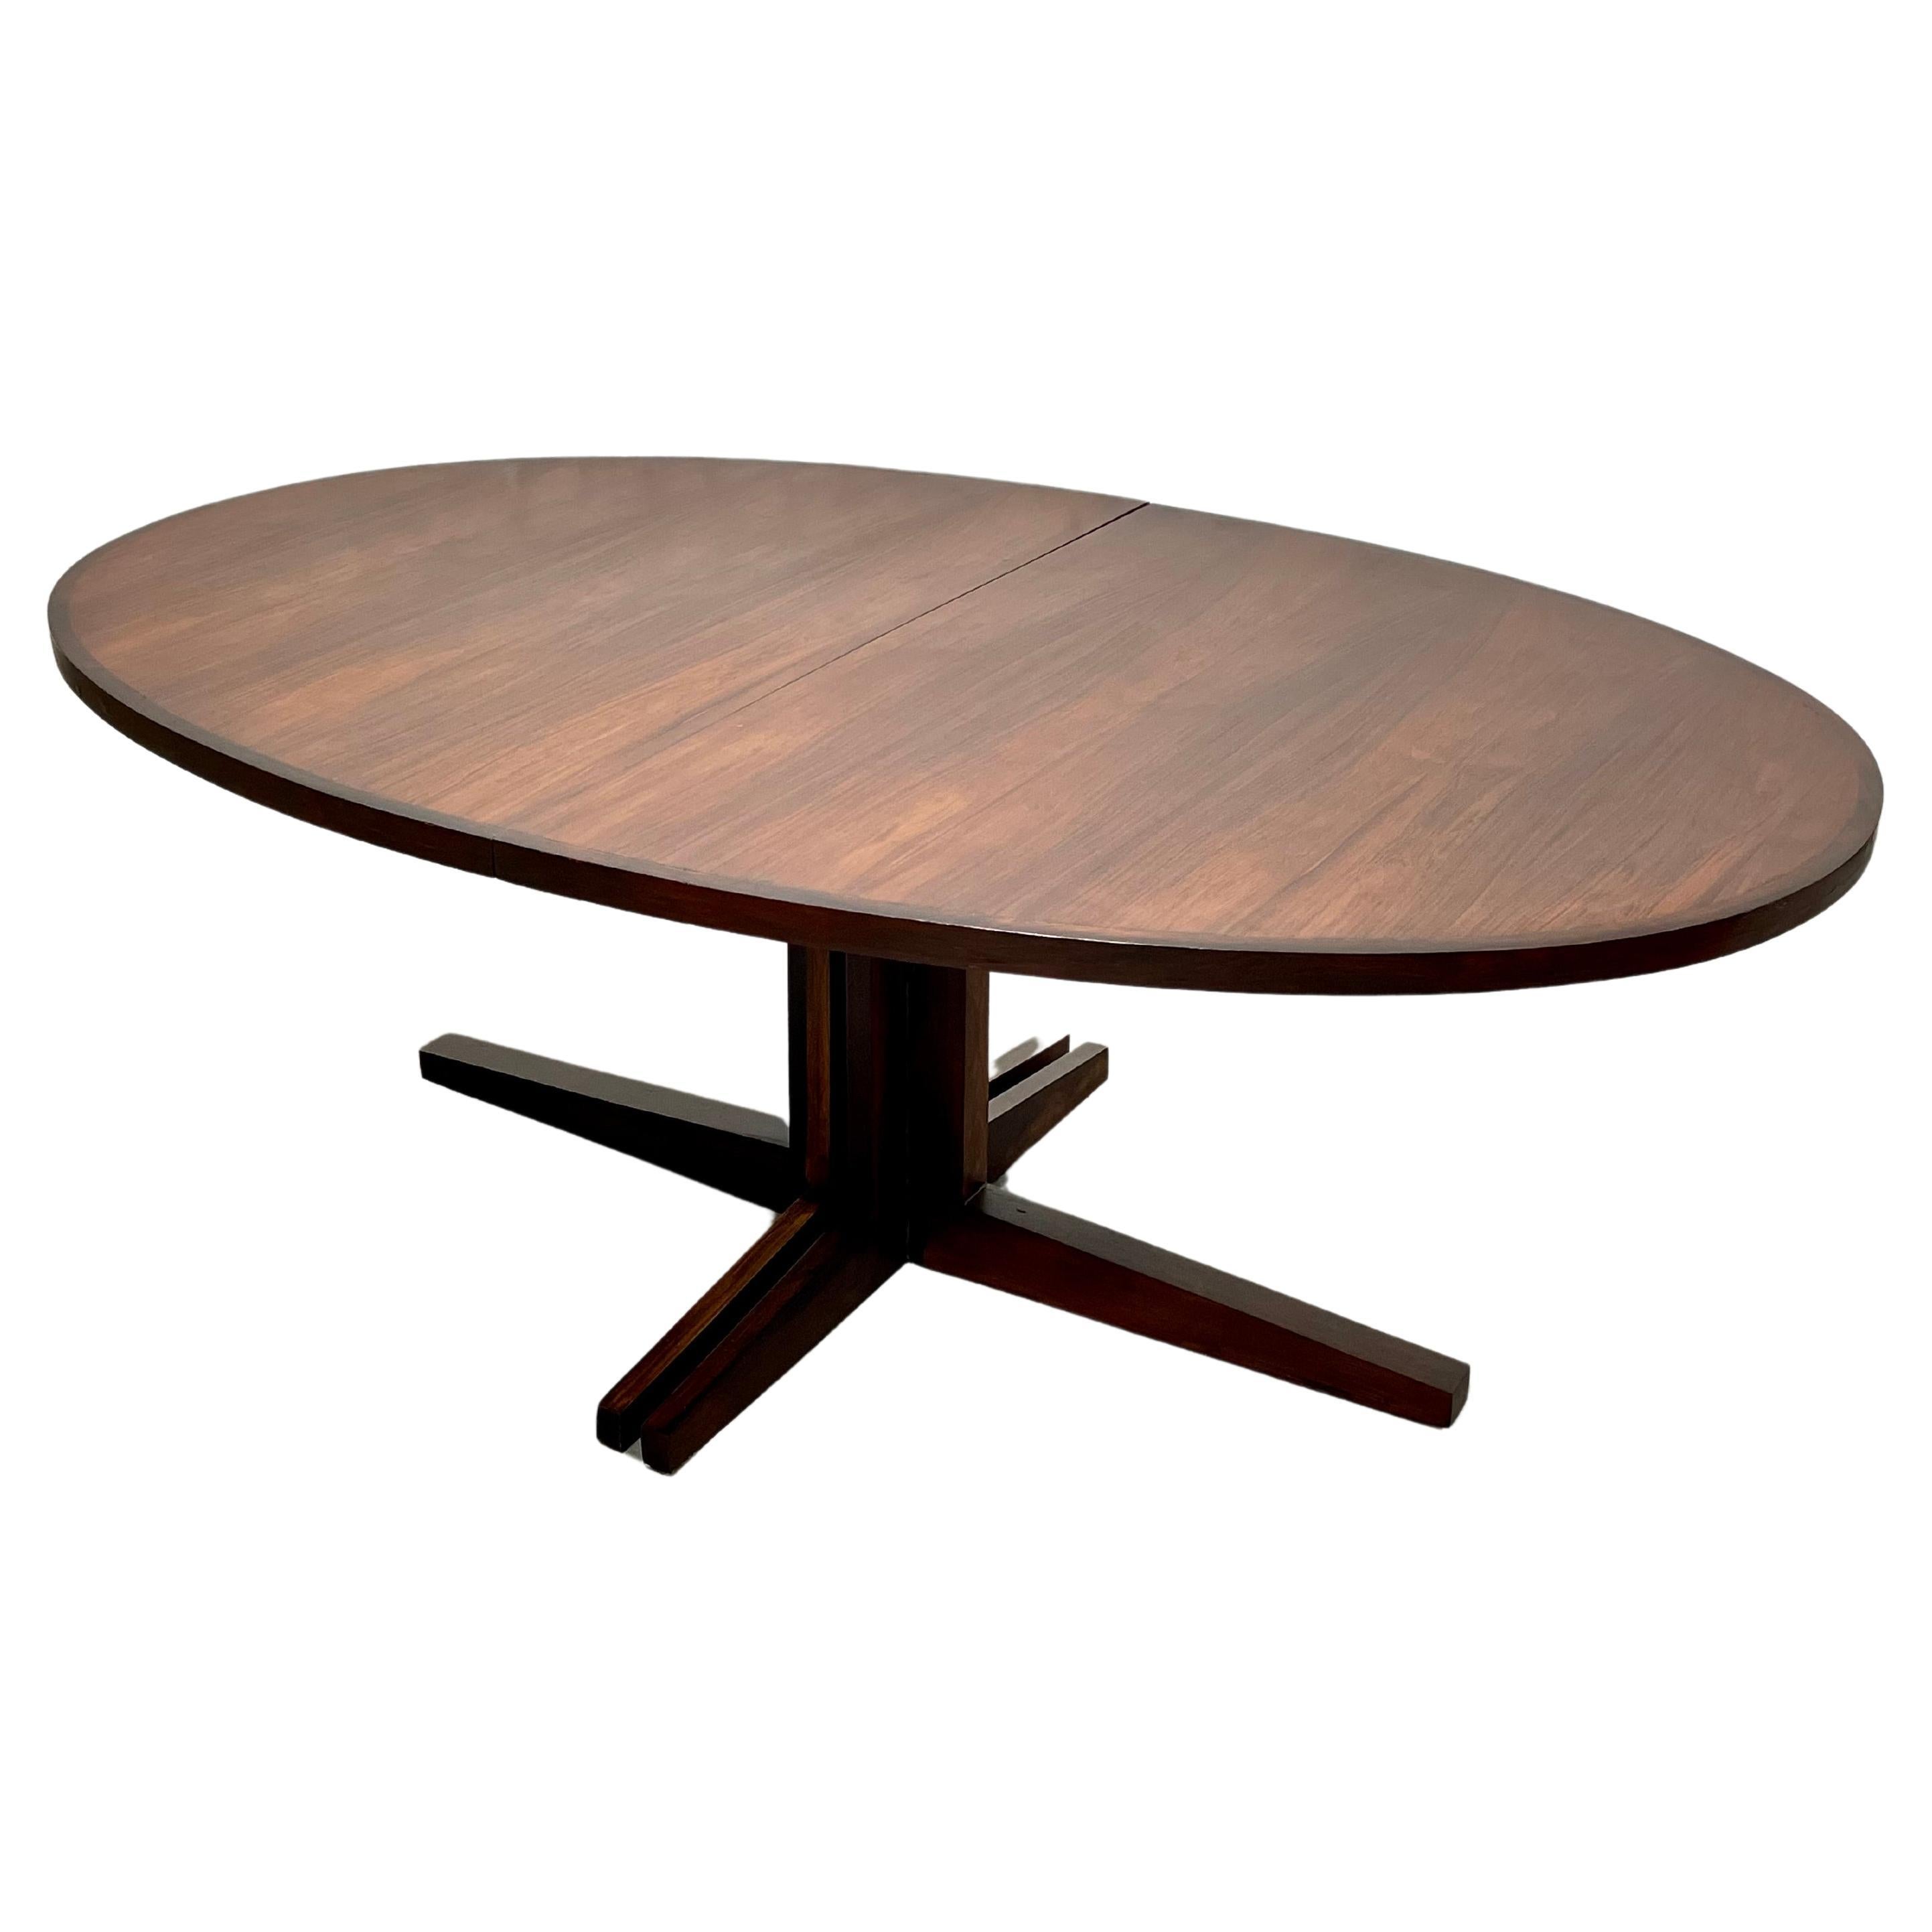 Extra LONG Mid Century Modern ROSEWOOD DINING Table by John Mortensen, c. 1960s